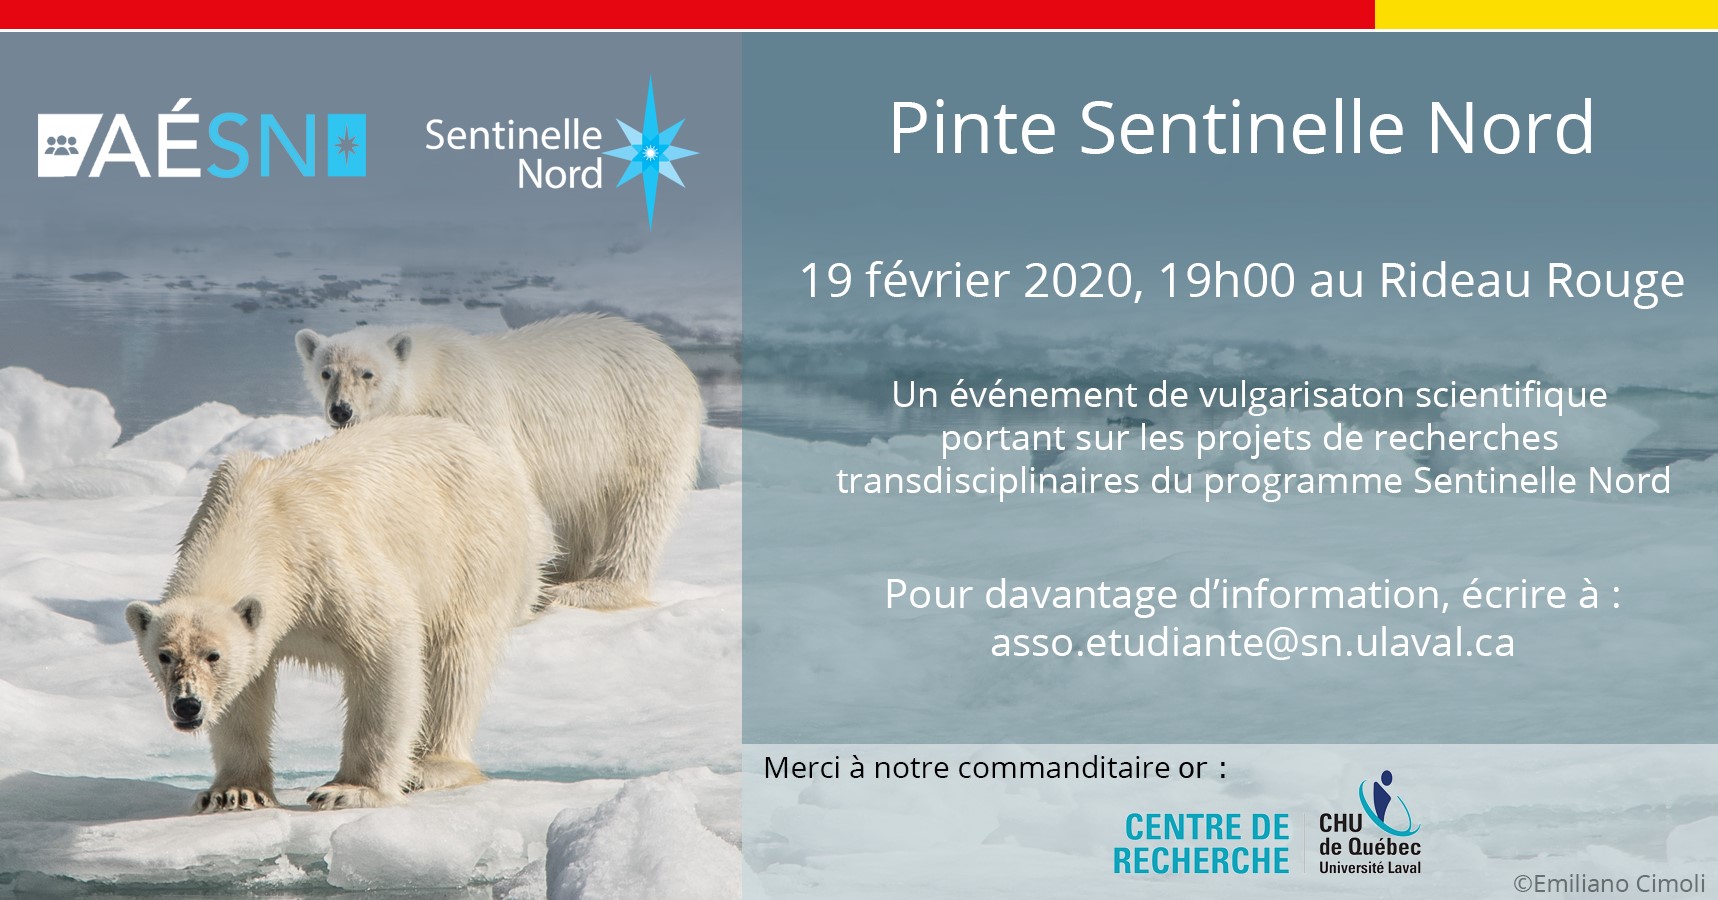 pinte sentinelle nord hiver 2020